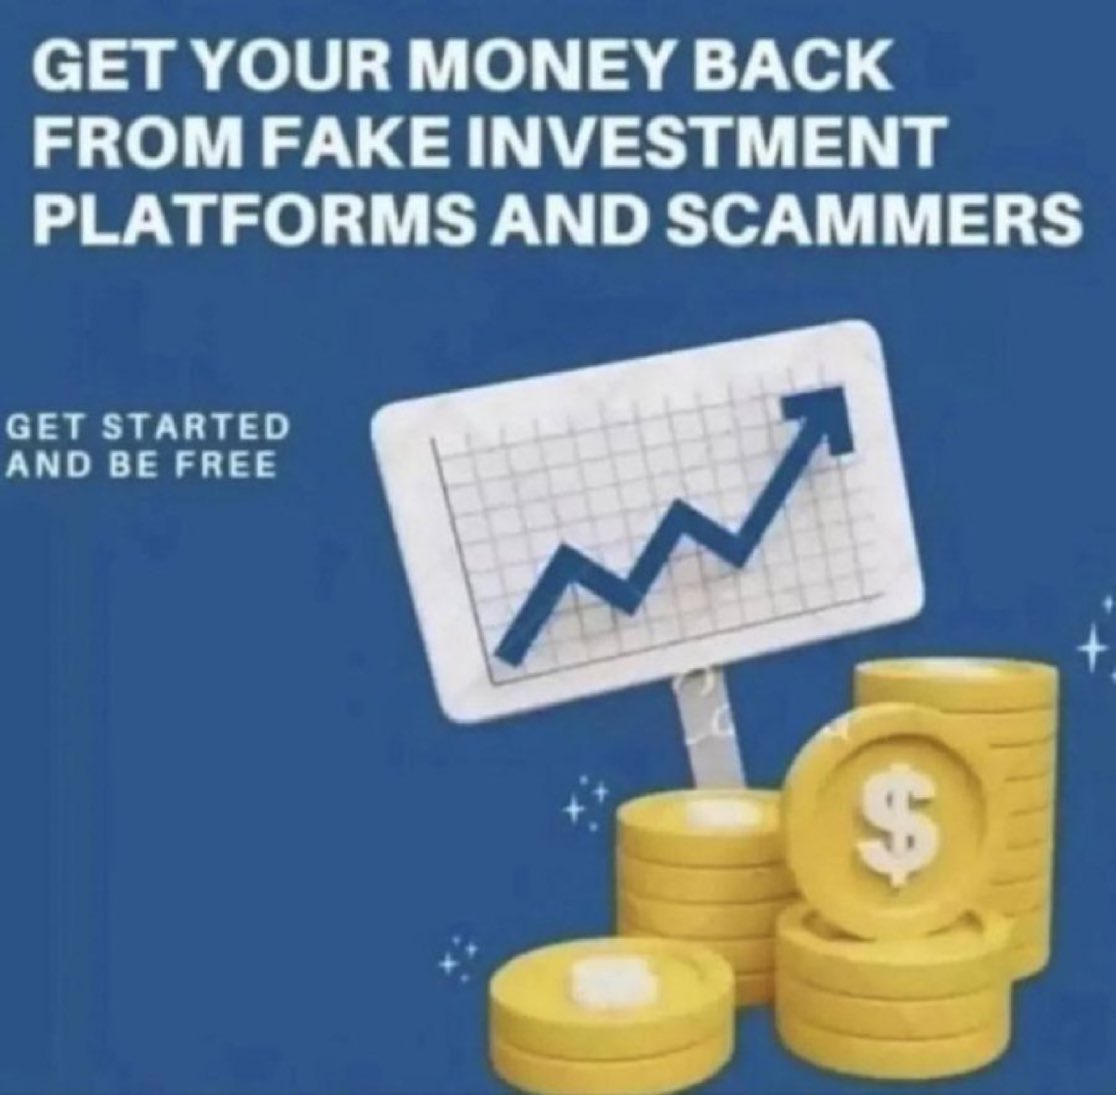 Facing issues withdrawing from any platforms? DM us now for help recovering your lost funds! #linkenfx #Nicheswap #matadvpro #NFT #wofbee #costek #coscoin #hacked #scam #BTC   #zealprimetrade #drecur #kupakeys #zonebie #bitenor #BTCUSD #bybitweb3 #traweb3 #AIRTM #agupe